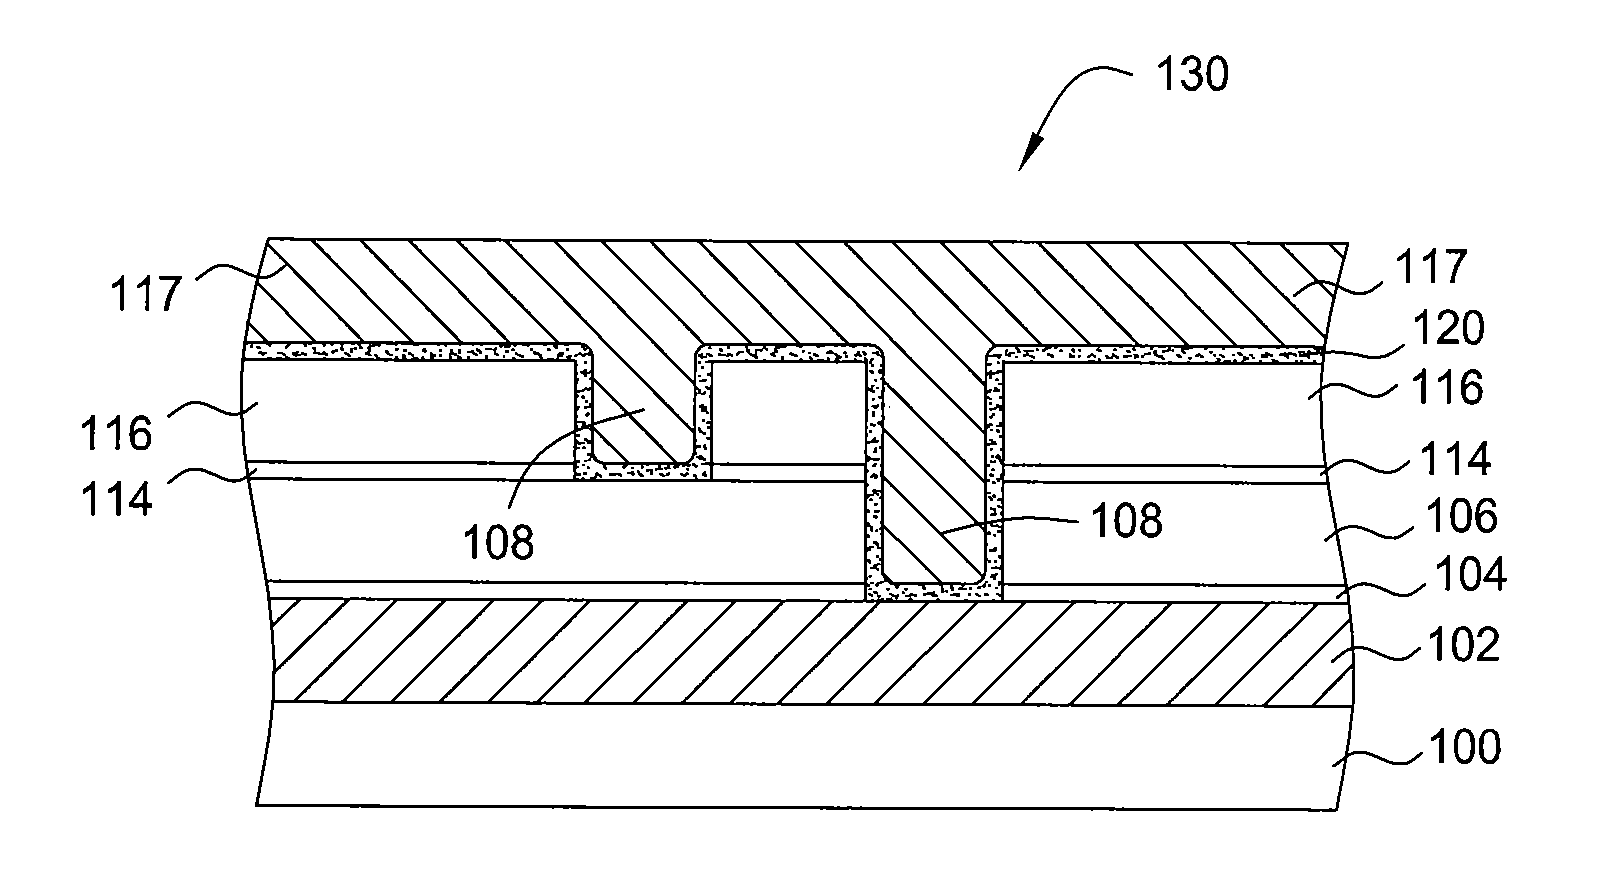 Method for improving electromigration lifetime of copper interconnection by extended post anneal